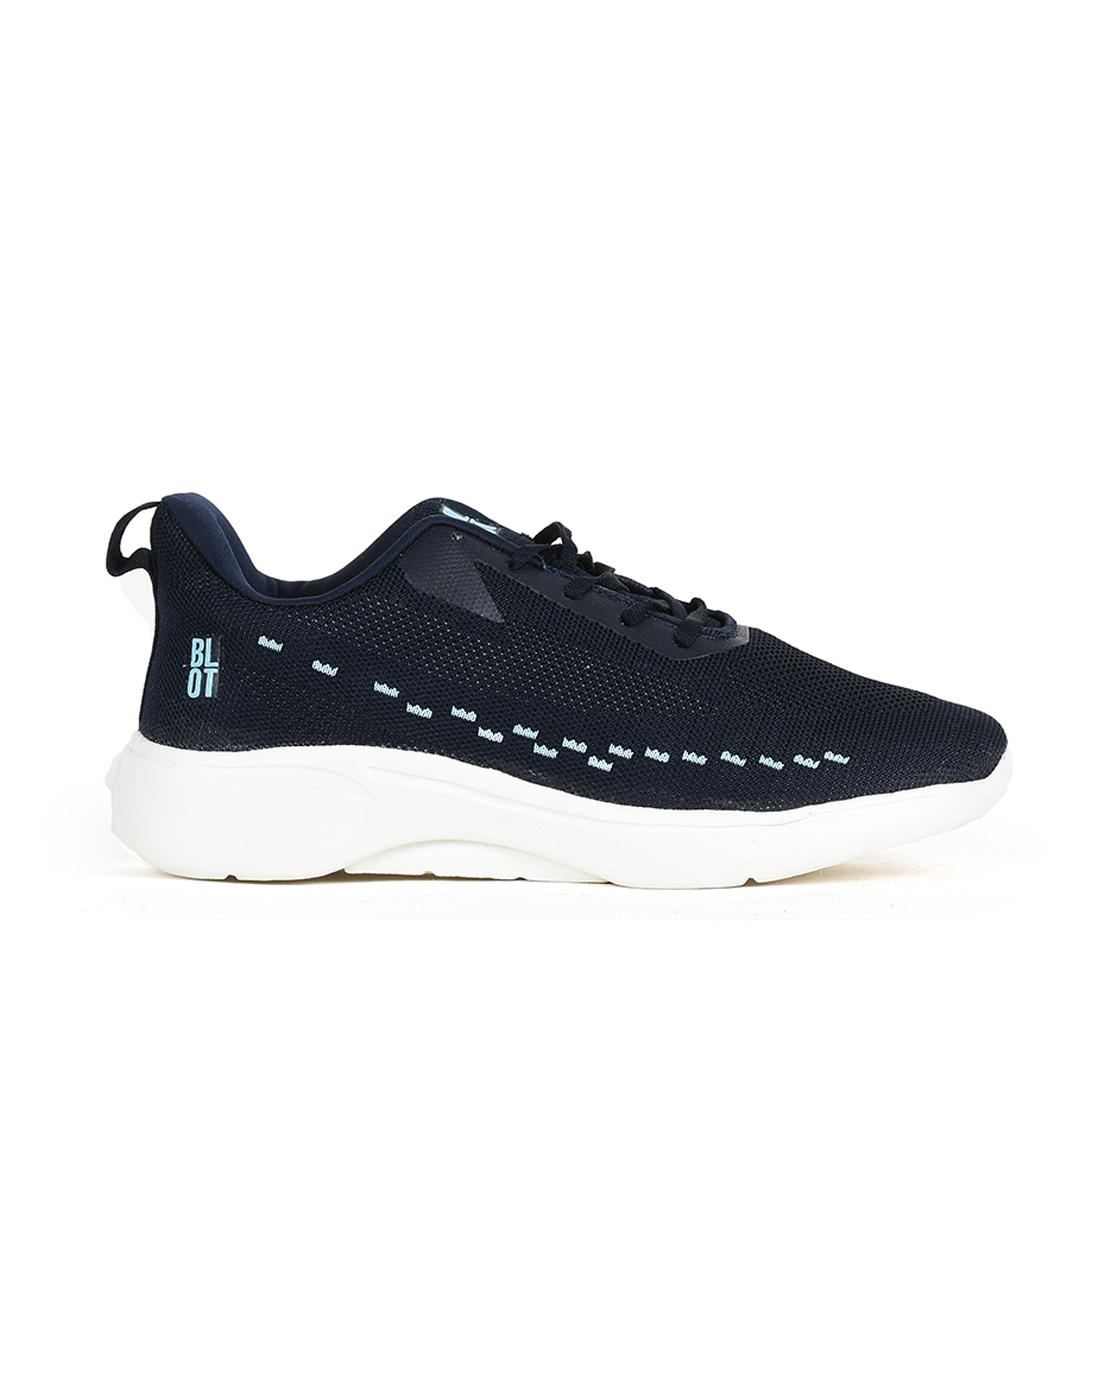 PARAGON Mens Colourblocked Sports Sneakers | Stylish, Comfortable and lightweight lace-up Sneakers for Men